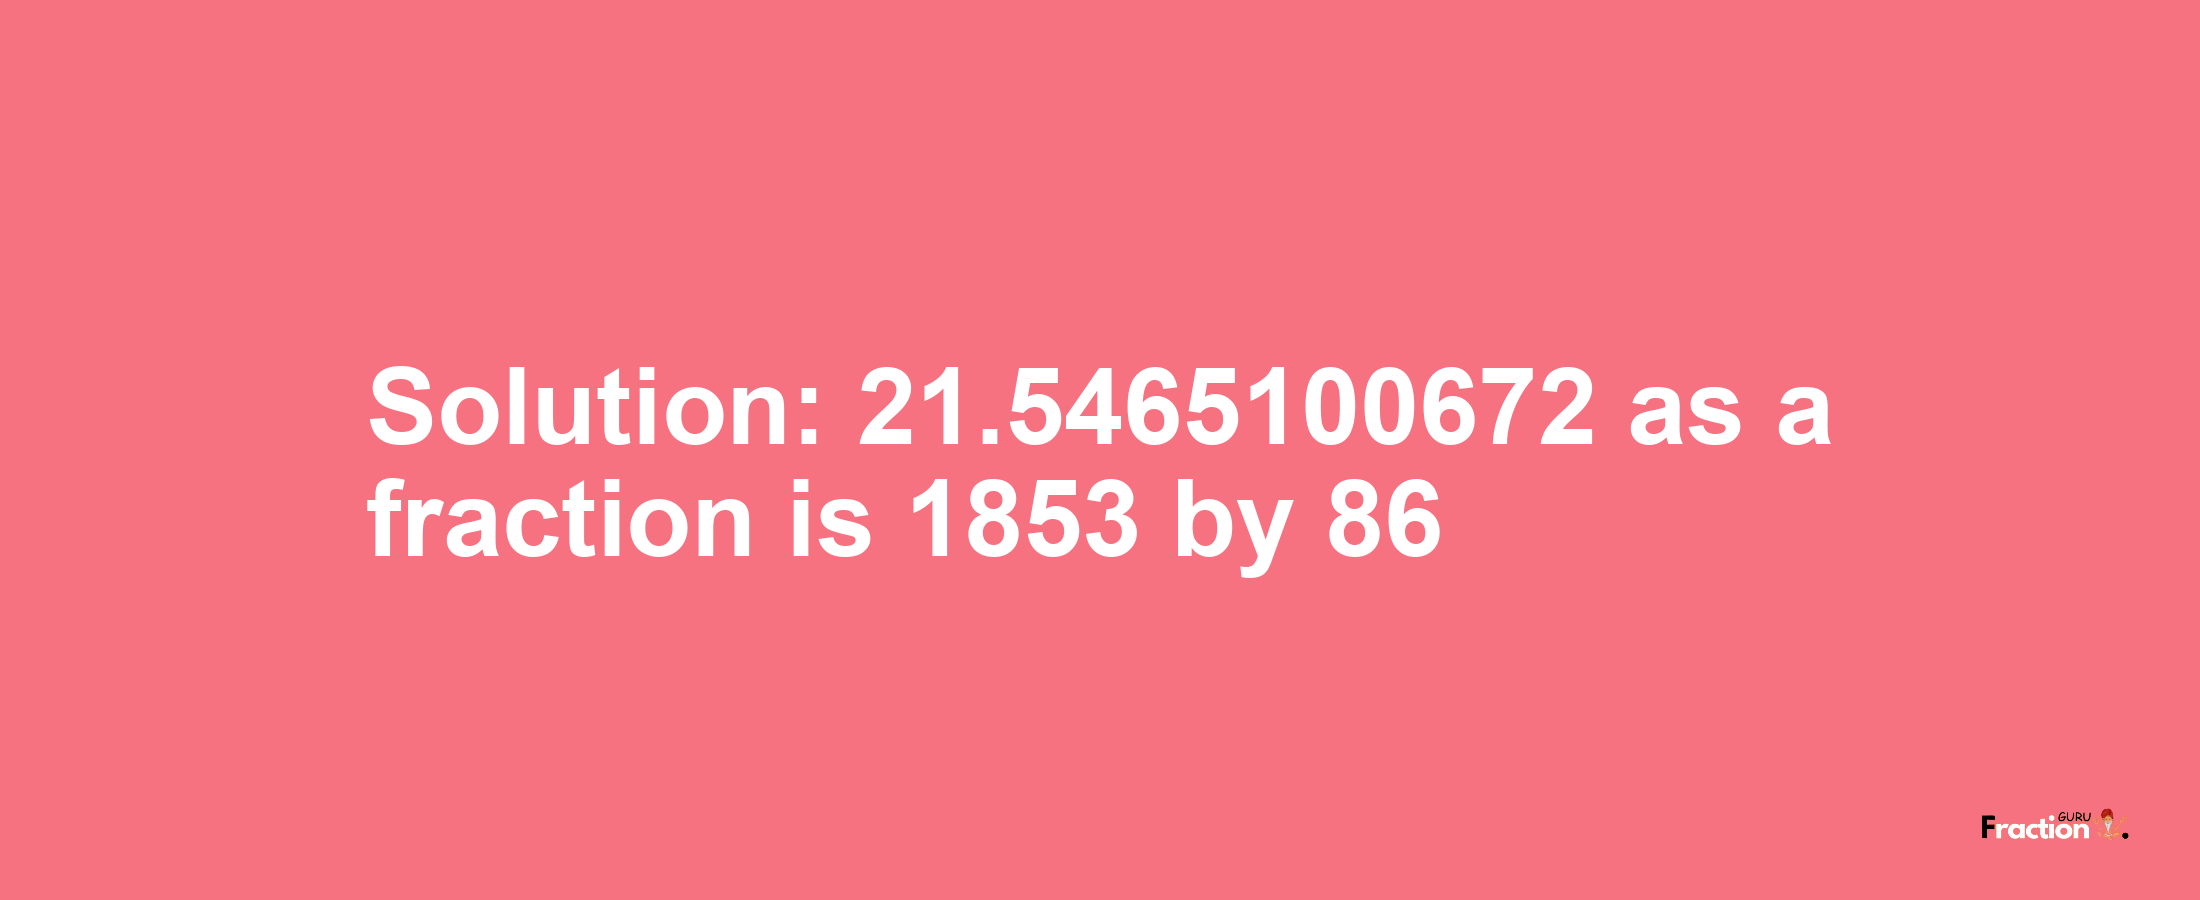 Solution:21.5465100672 as a fraction is 1853/86